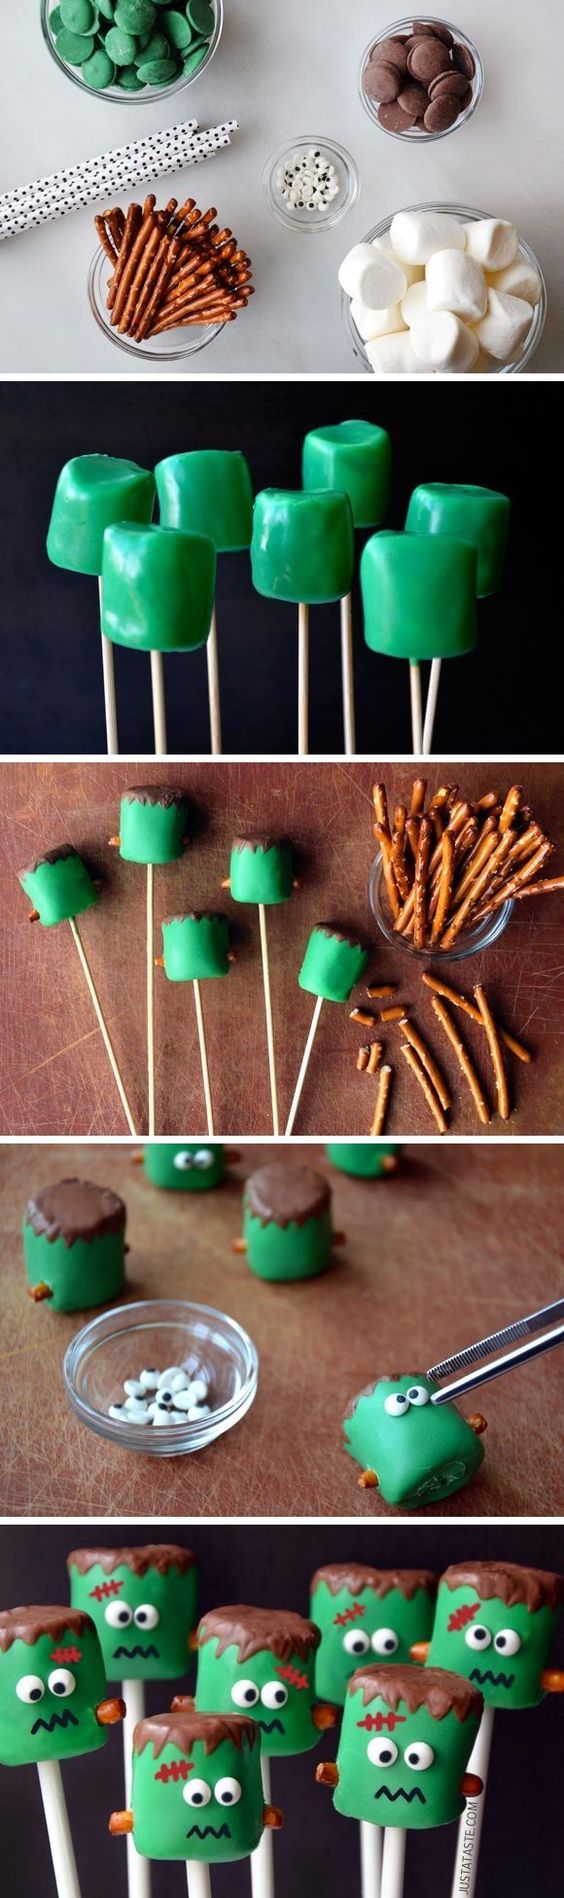 37 Unique And Cute DIY Halloween Crafts For Kids To Steal The Show